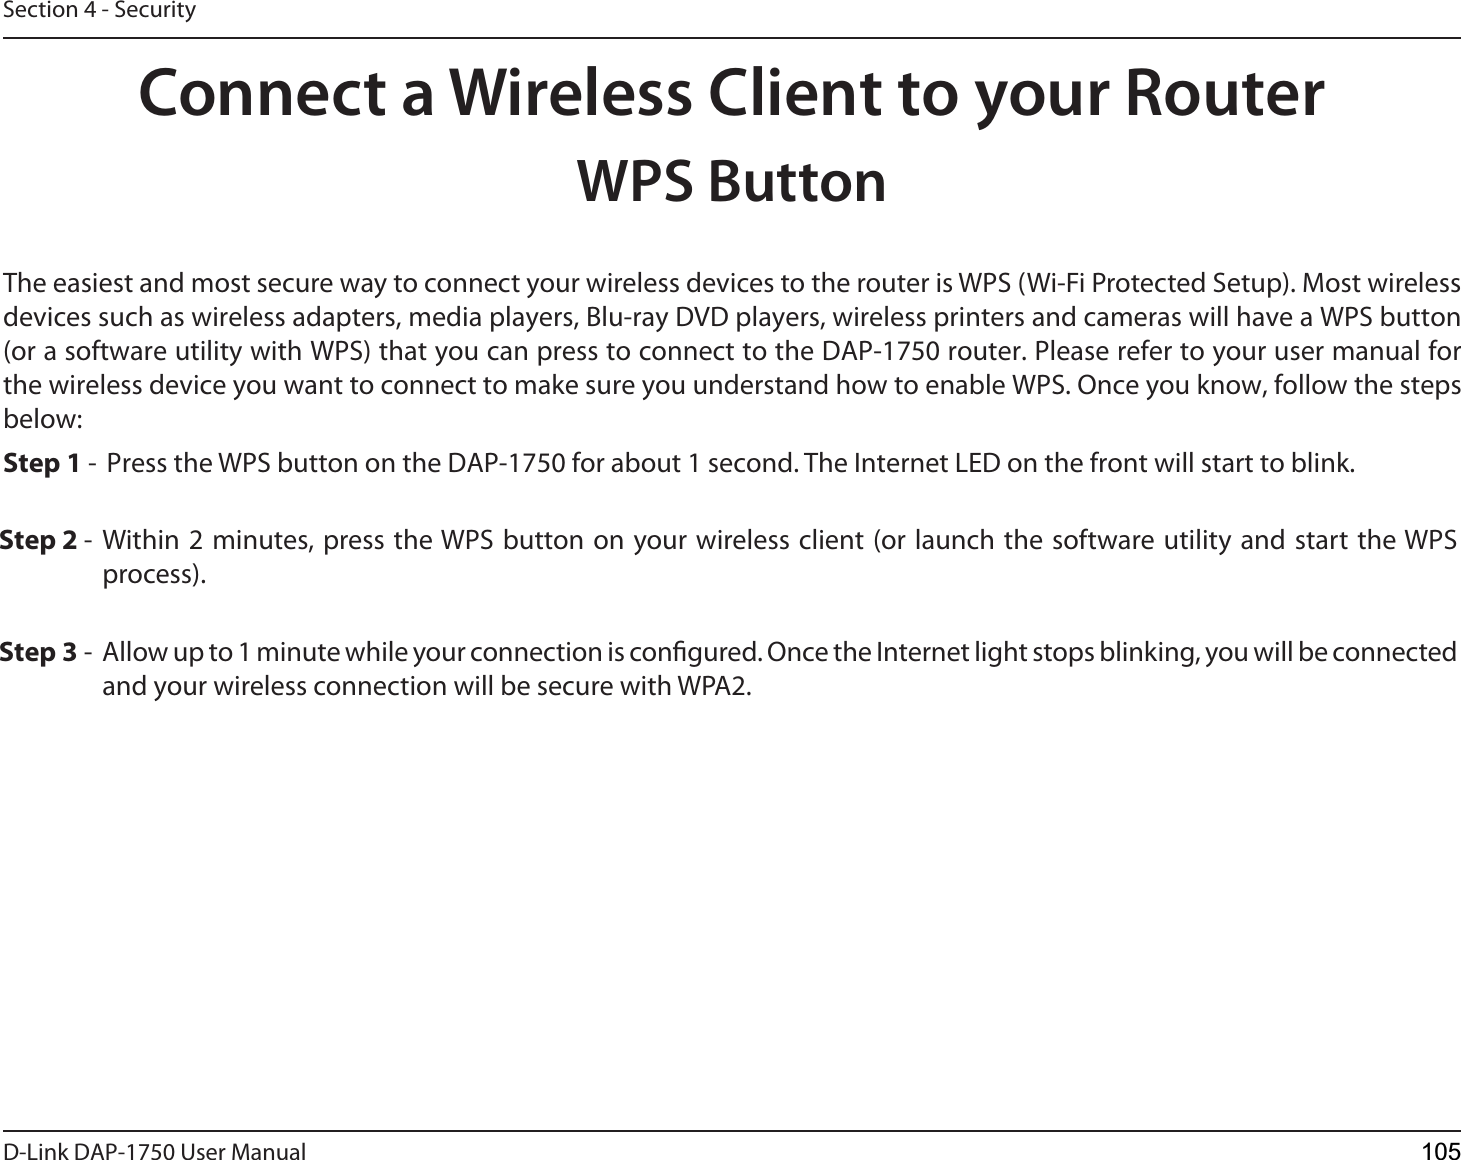 D-Link %&quot;1 User ManualSection 4 - SecurityConnect a Wireless Client to your RouterWPS ButtonStep 2 - Within 2 minutes, press the WPS button on your wireless client (or launch the software utility and start the WPS process).The easiest and most secure way to connect your wireless devices to the router is WPS (Wi-Fi Protected Setup). Most wireless devices such as wireless adapters, media players, Blu-ray DVD players, wireless printers and cameras will have a WPS button (or a software utility with WPS) that you can press to connect to the %&quot;1 router. Please refer to your user manual for the wireless device you want to connect to make sure you understand how to enable WPS. Once you know, follow the steps below:Step 1 -  Press the WPS button on the %&quot;1 for about 1 second. The Internet LED on the front will start to blink.Step 3 -  Allow up to 1 minute while your connection is congured. Once the Internet light stops blinking, you will be connected and your wireless connection will be secure with WPA2.105